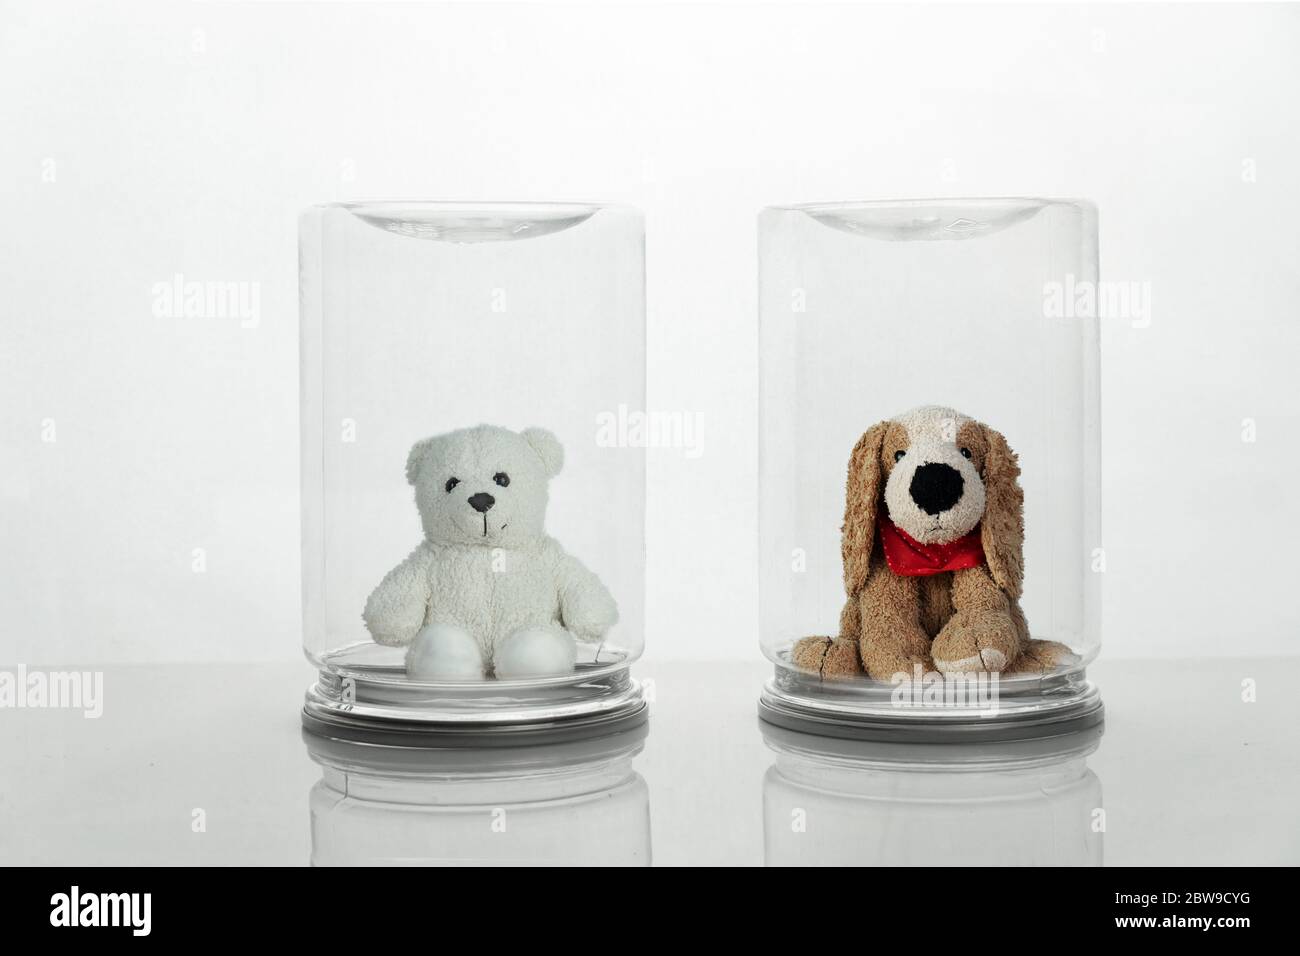 brown dog and white bear fluffy doll protect by transparency glass protection in social and physical distancing for covid-19 virus concept medical hea Stock Photo